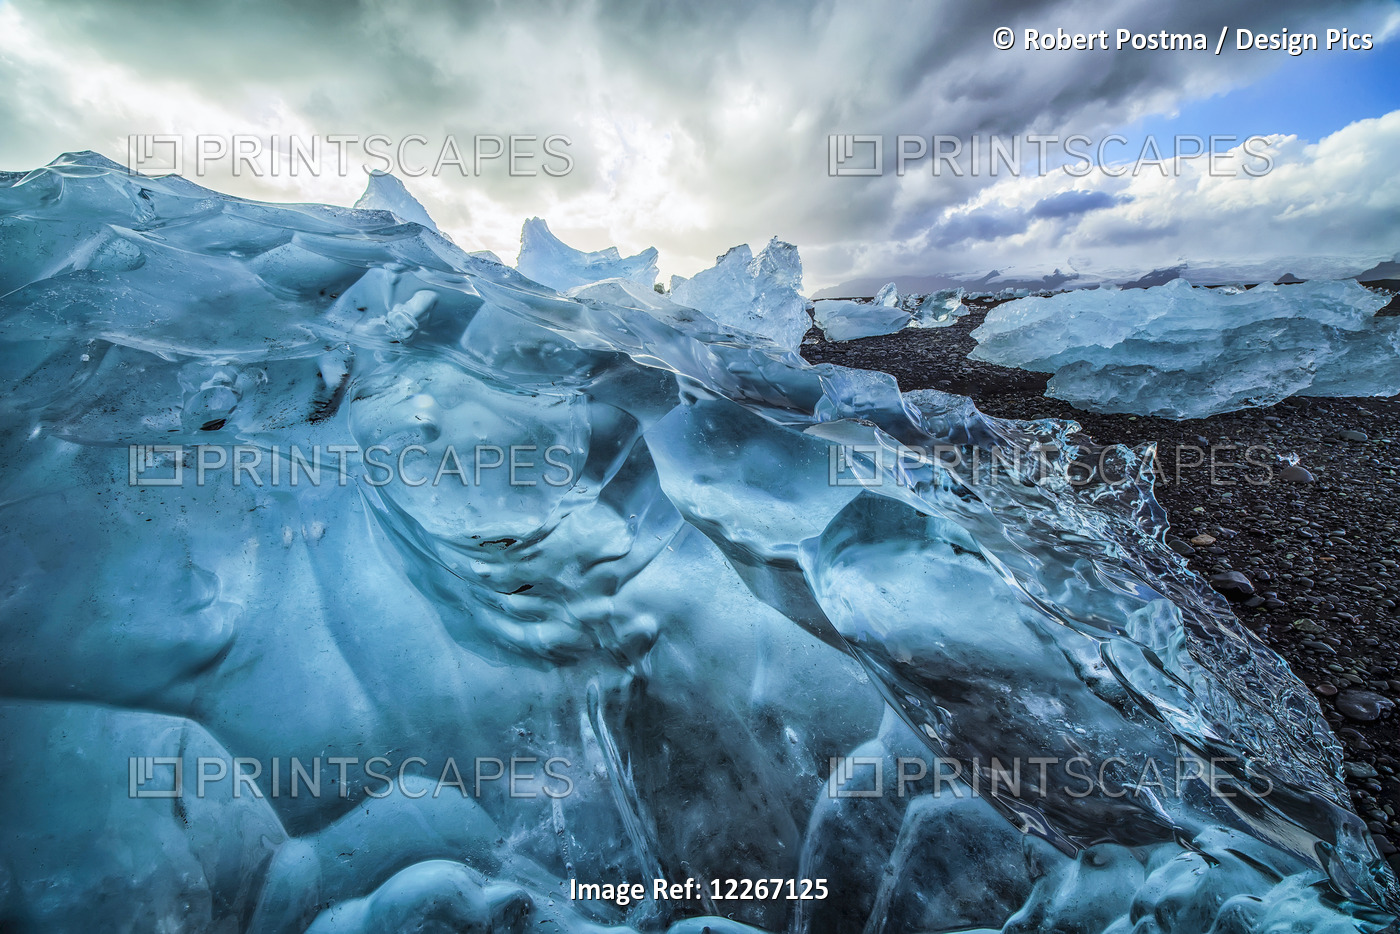 Along The South Shore Of Iceland, Large Chunks Of Ice Litter The Beach After ...